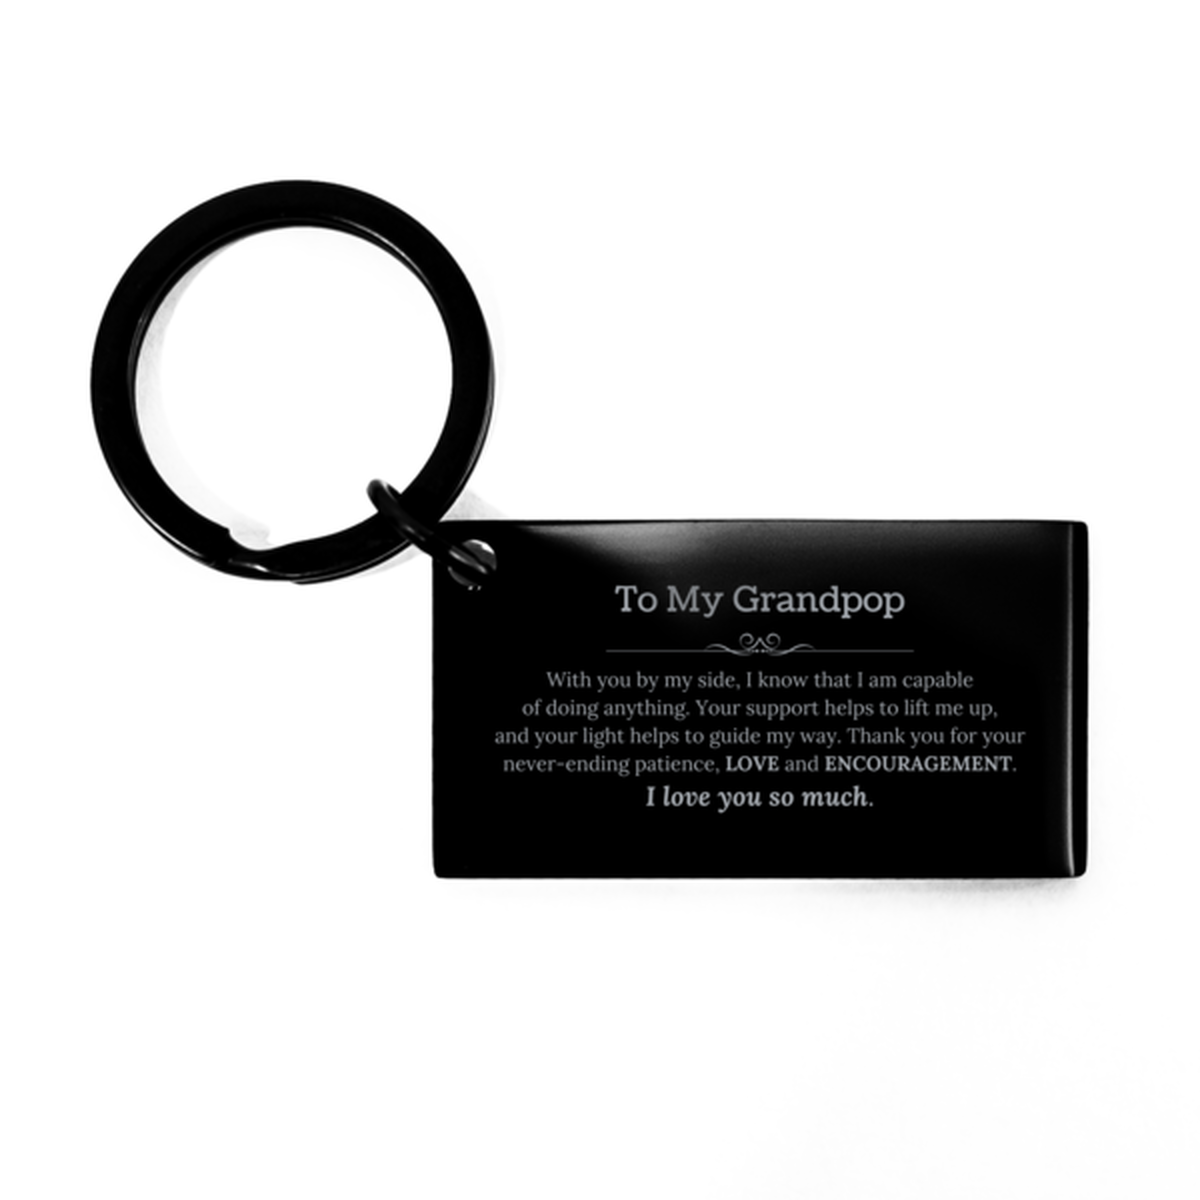 Appreciation Grandpop Keychain Gifts, To My Grandpop Birthday Christmas Wedding Keepsake Gifts for Grandpop With you by my side, I know that I am capable of doing anything. I love you so much